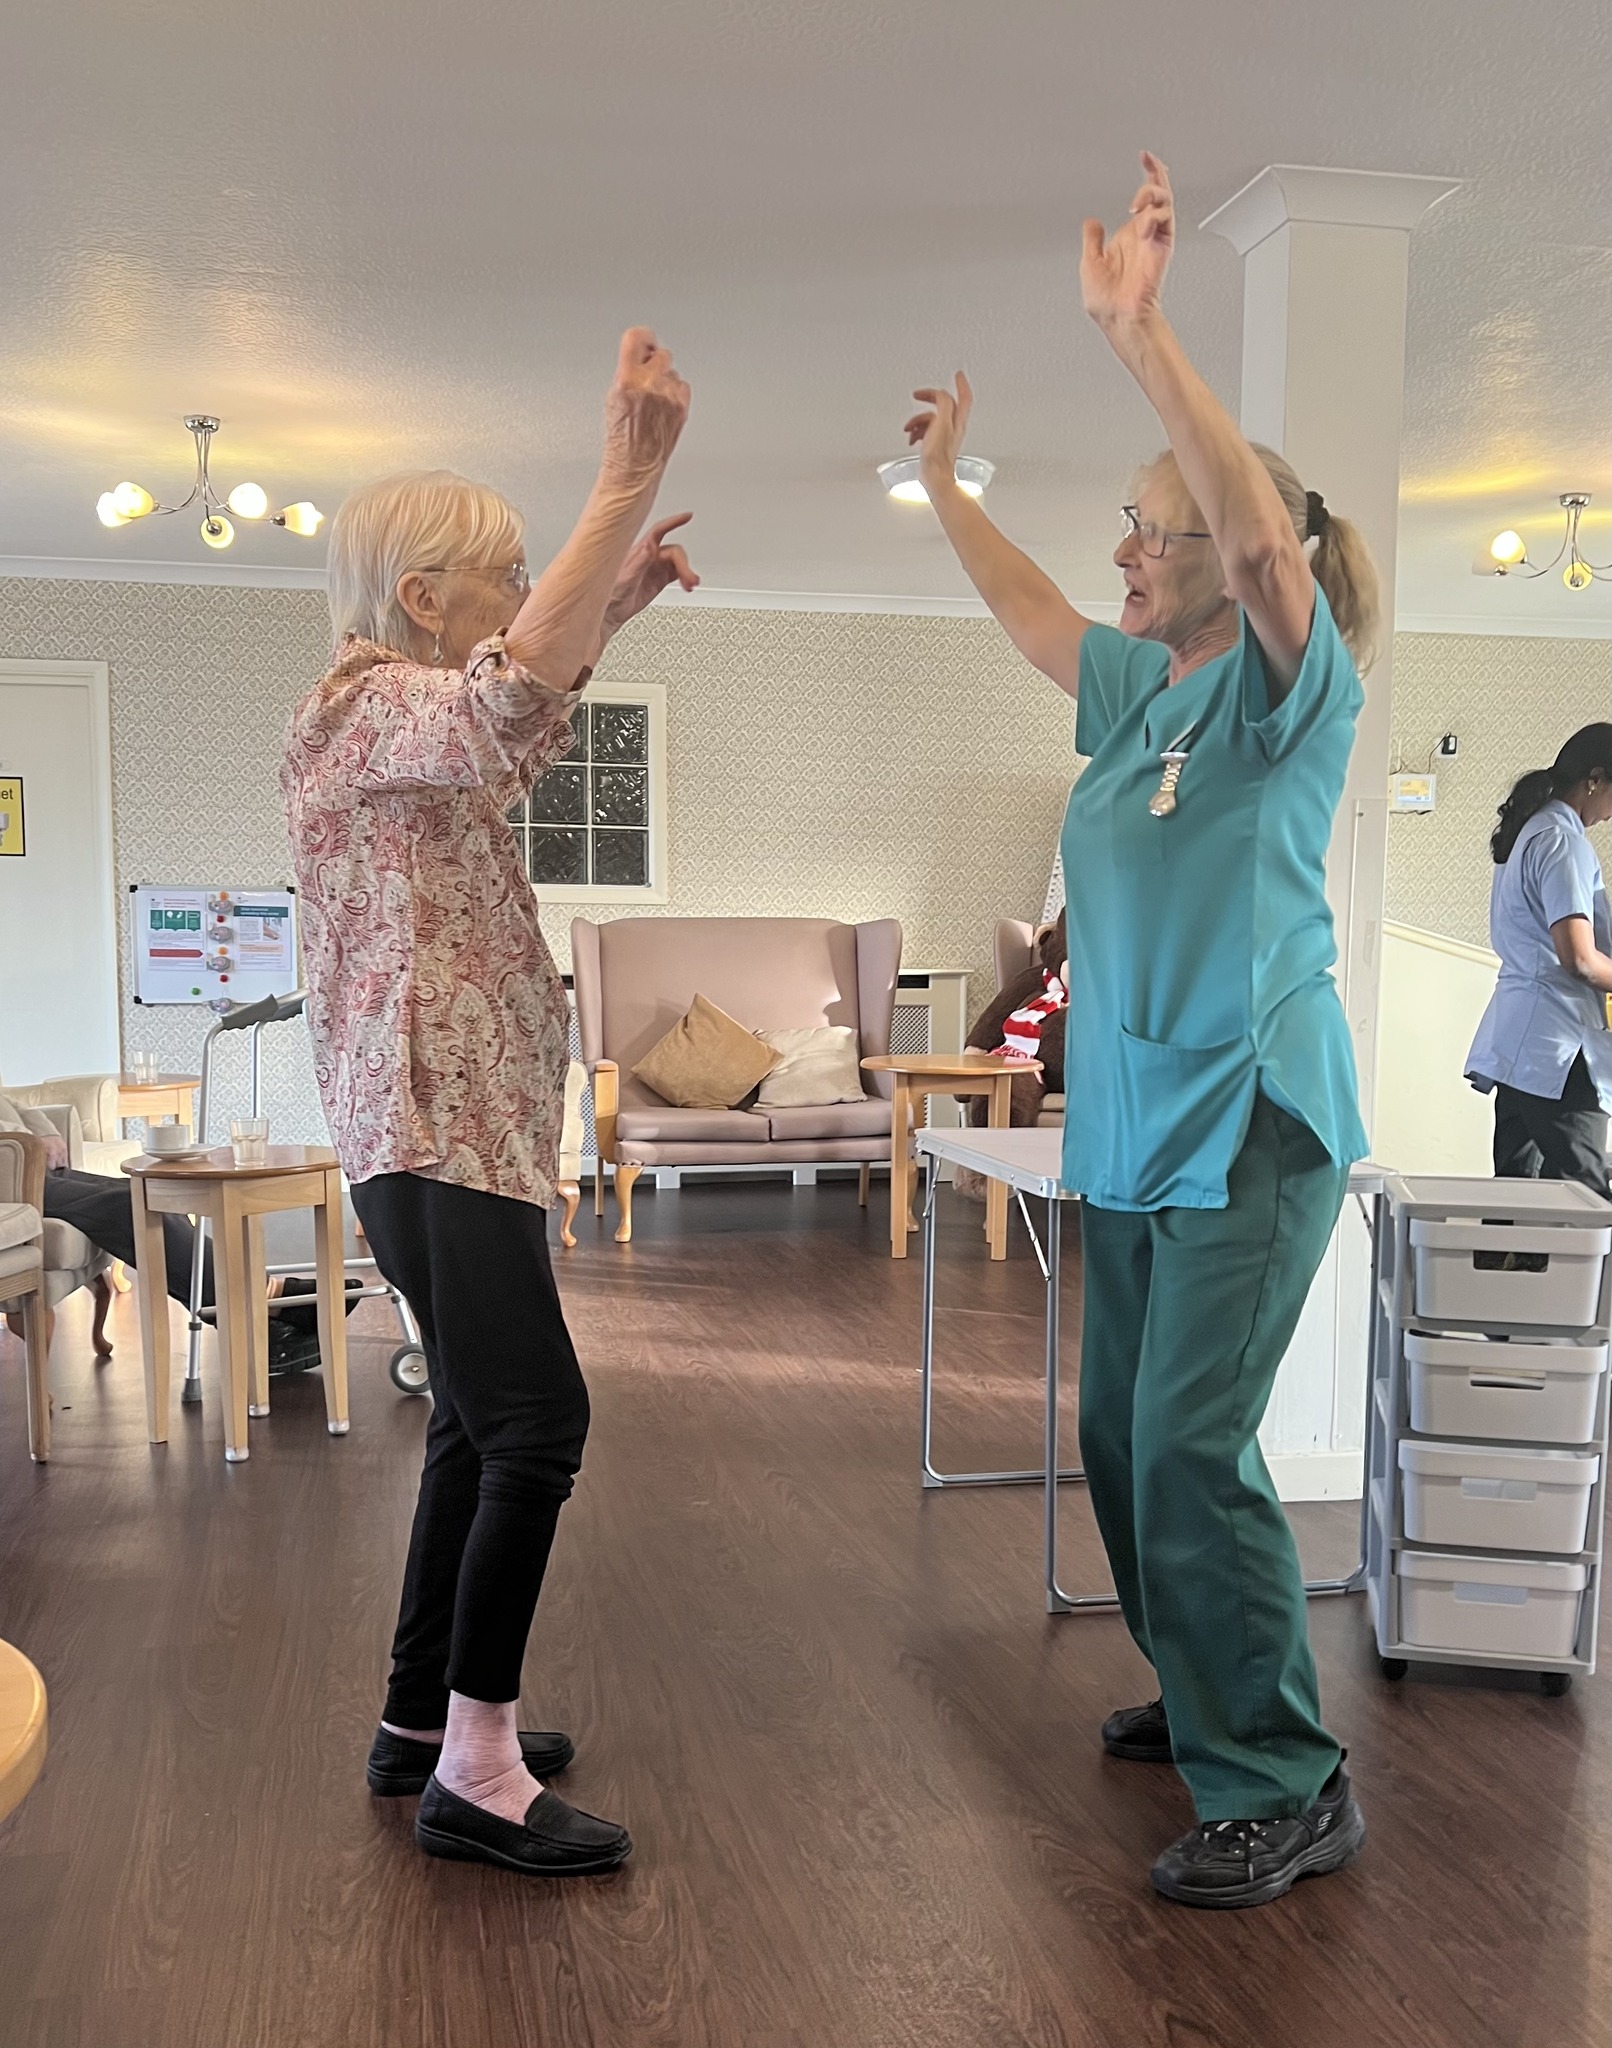 East Sussex Care Home | A resident dancing with a care worker